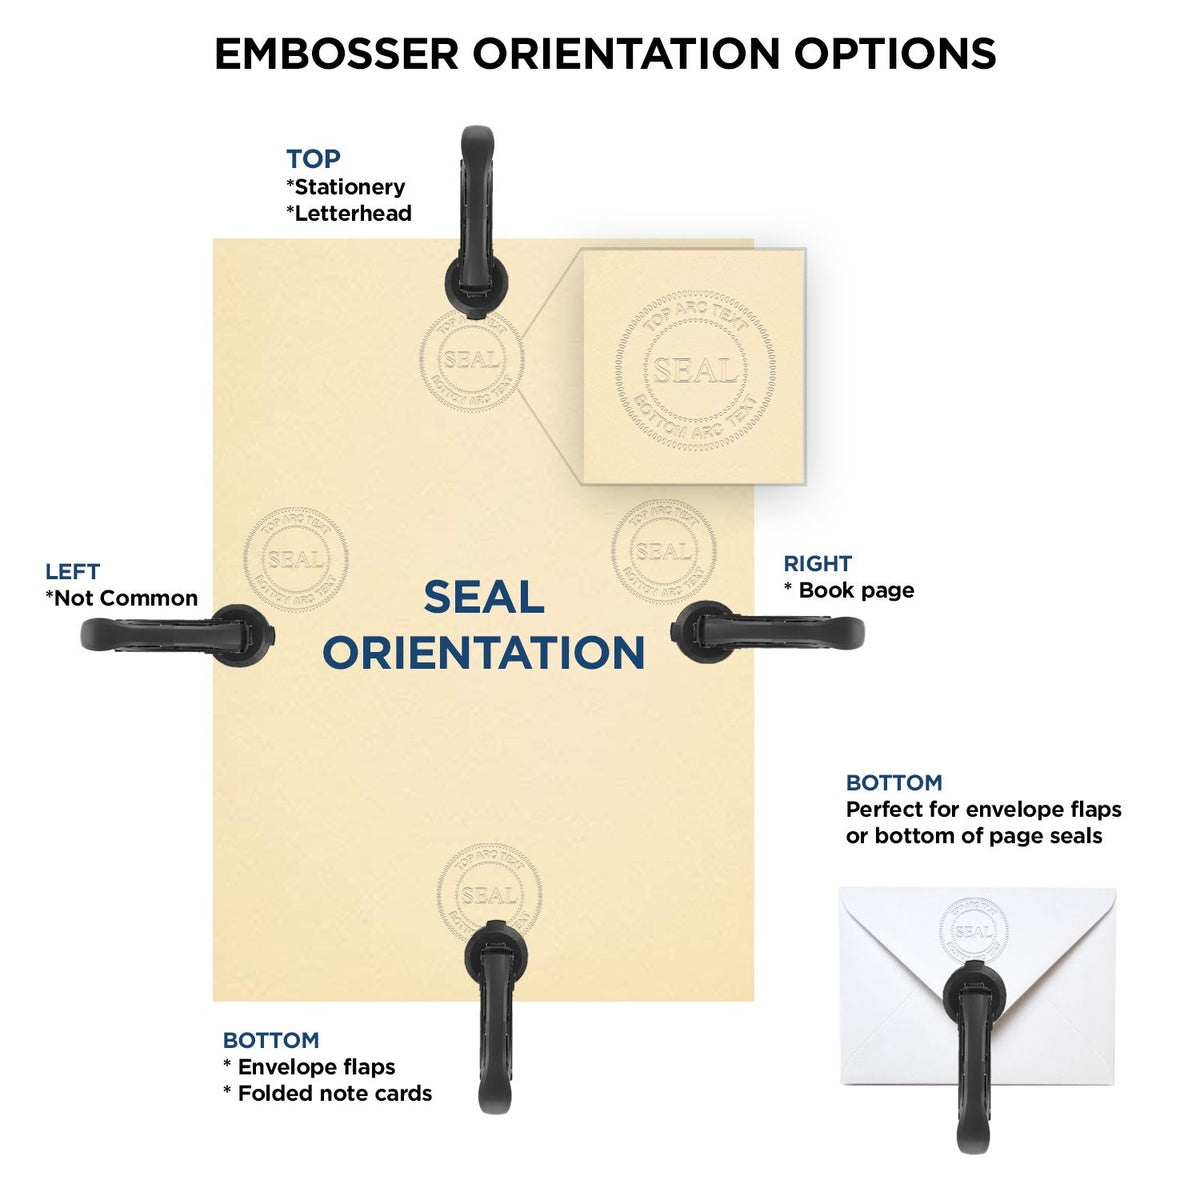 An infographic for the Hybrid Maryland Land Surveyor Seal showing embosser orientation, this is showing examples of a top, bottom, right and left insert.